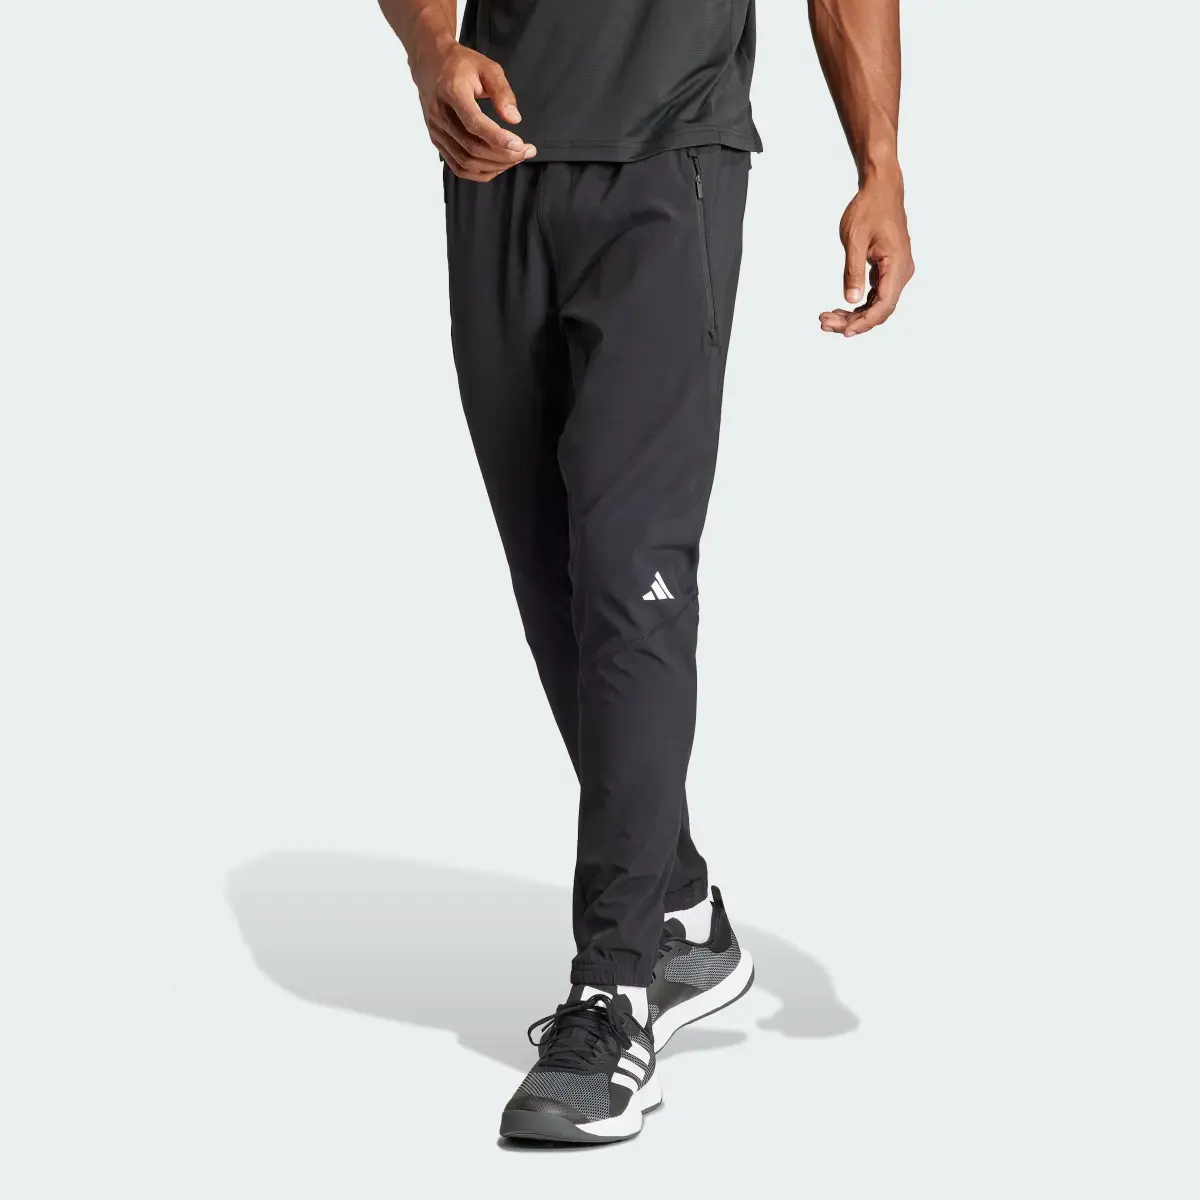 Adidas Designed for Training Workout Pants. 1